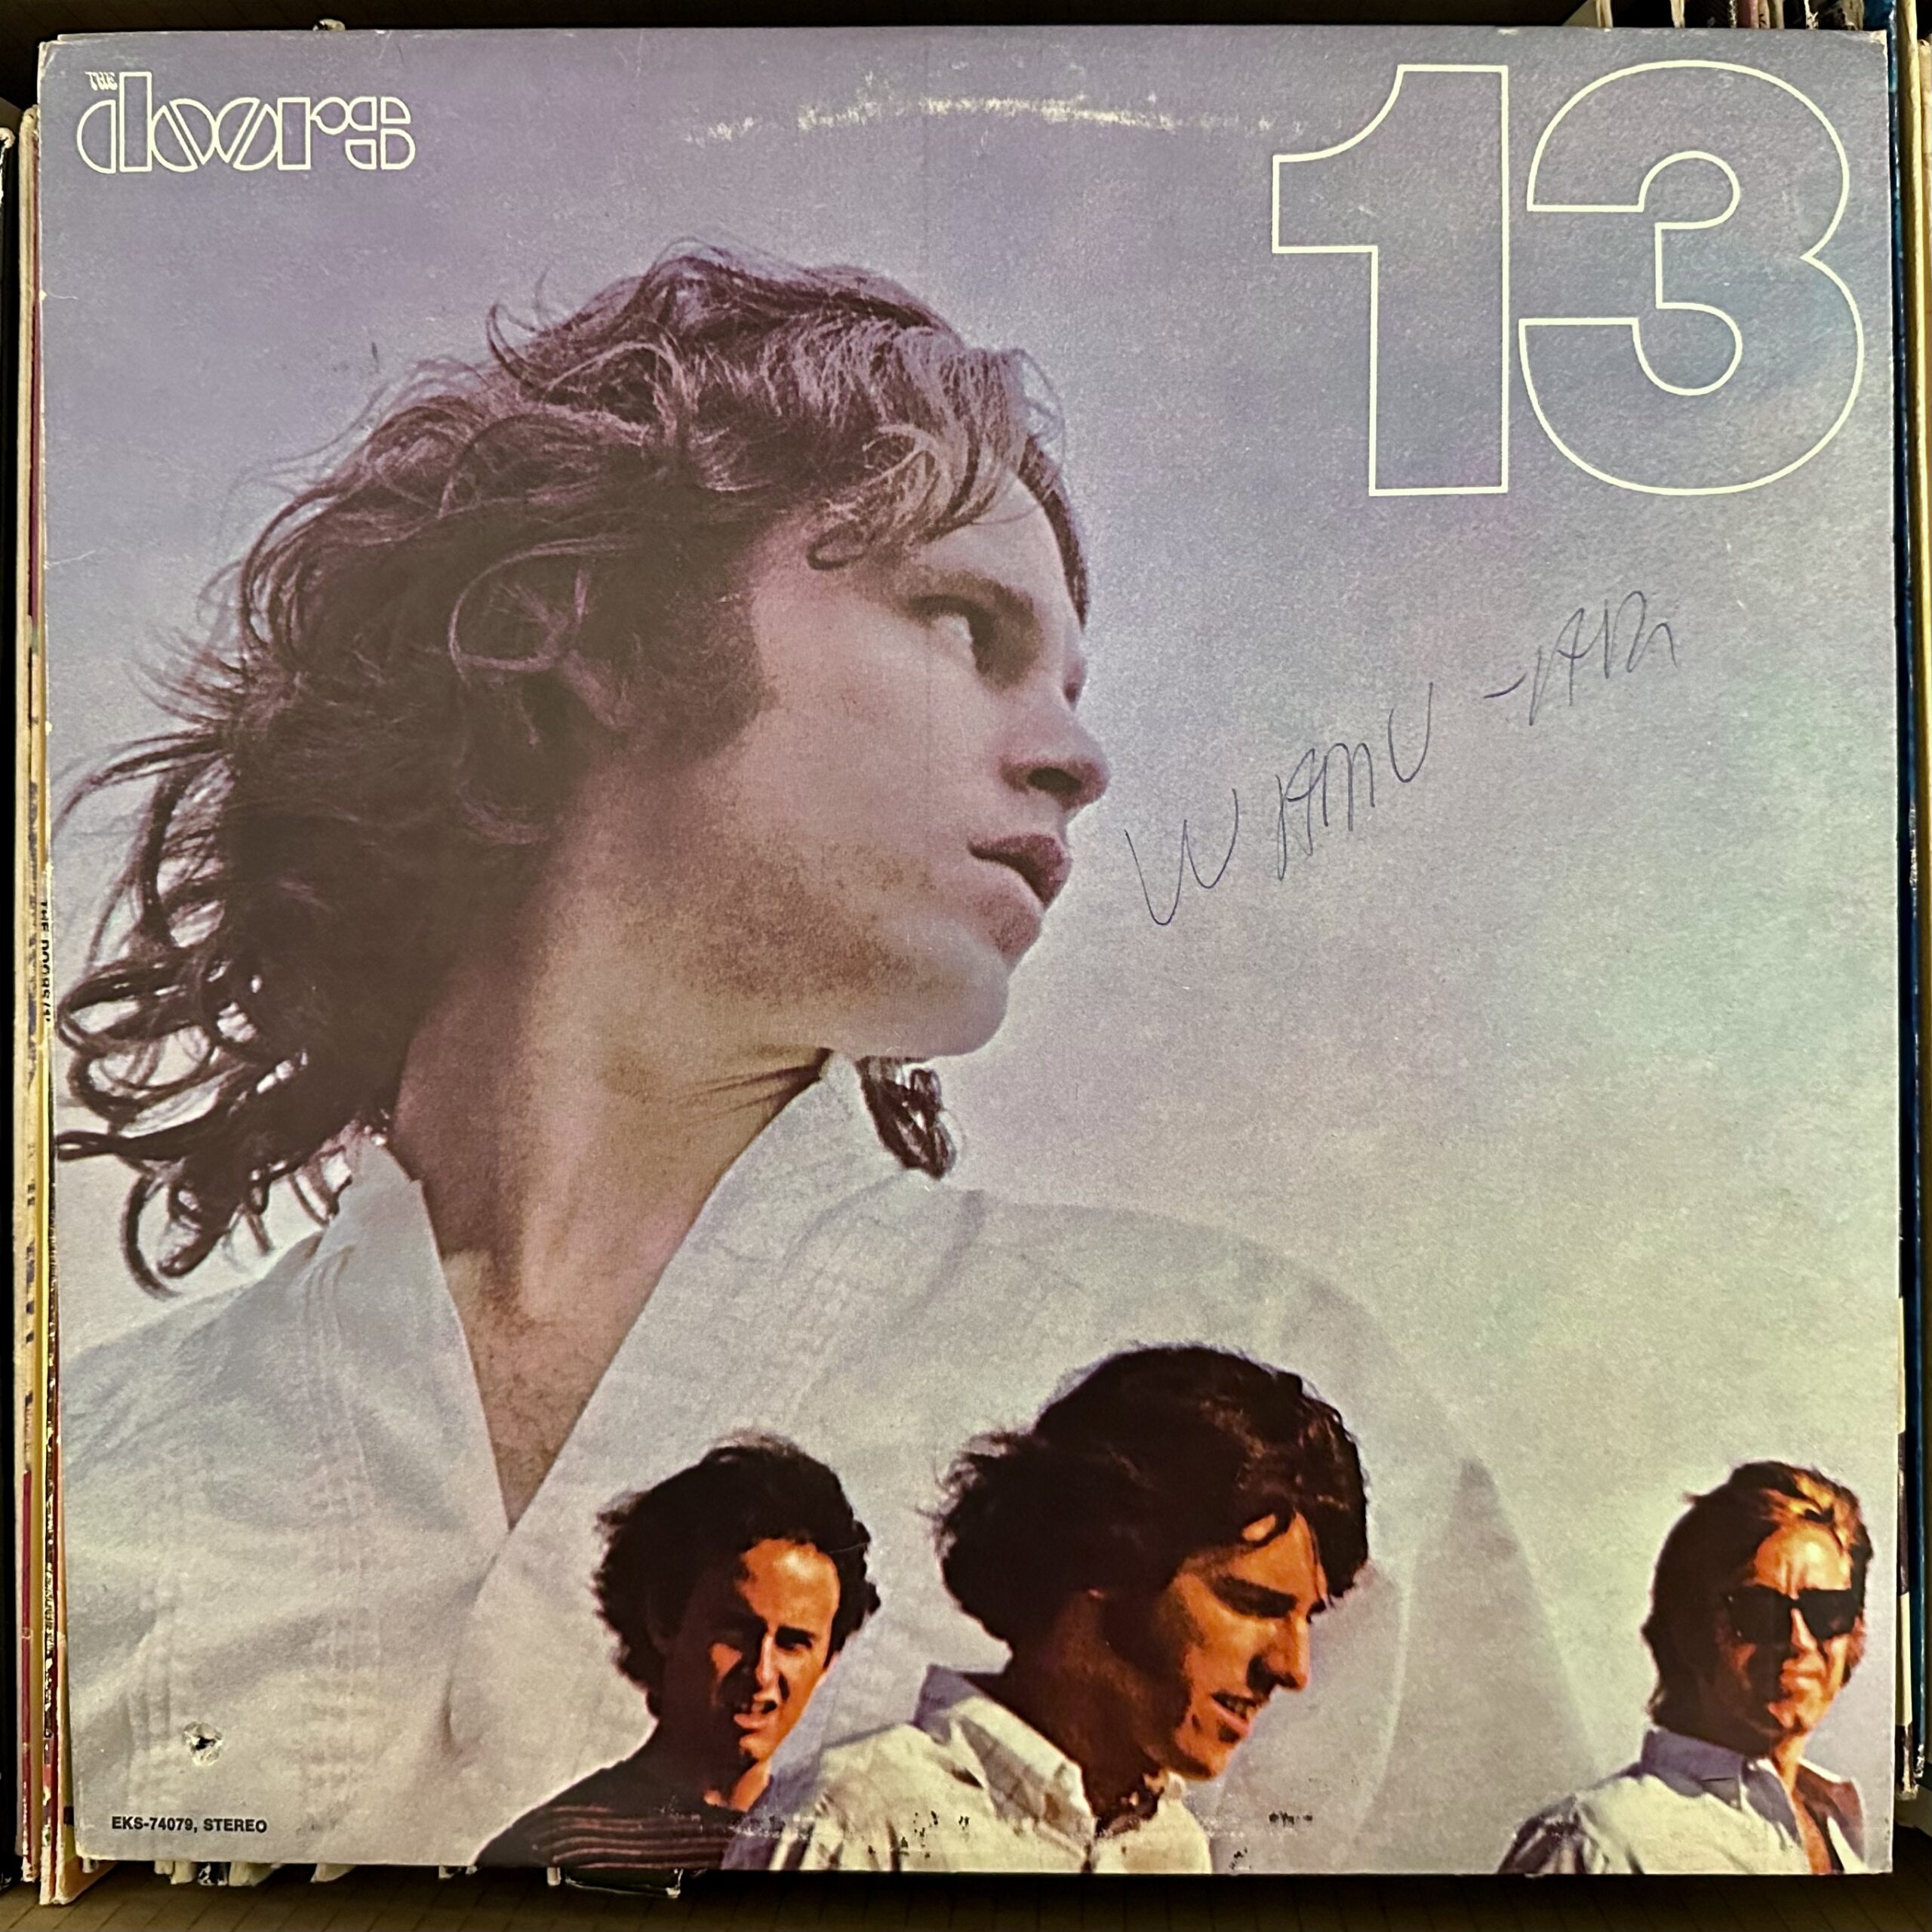 13 by the Doors